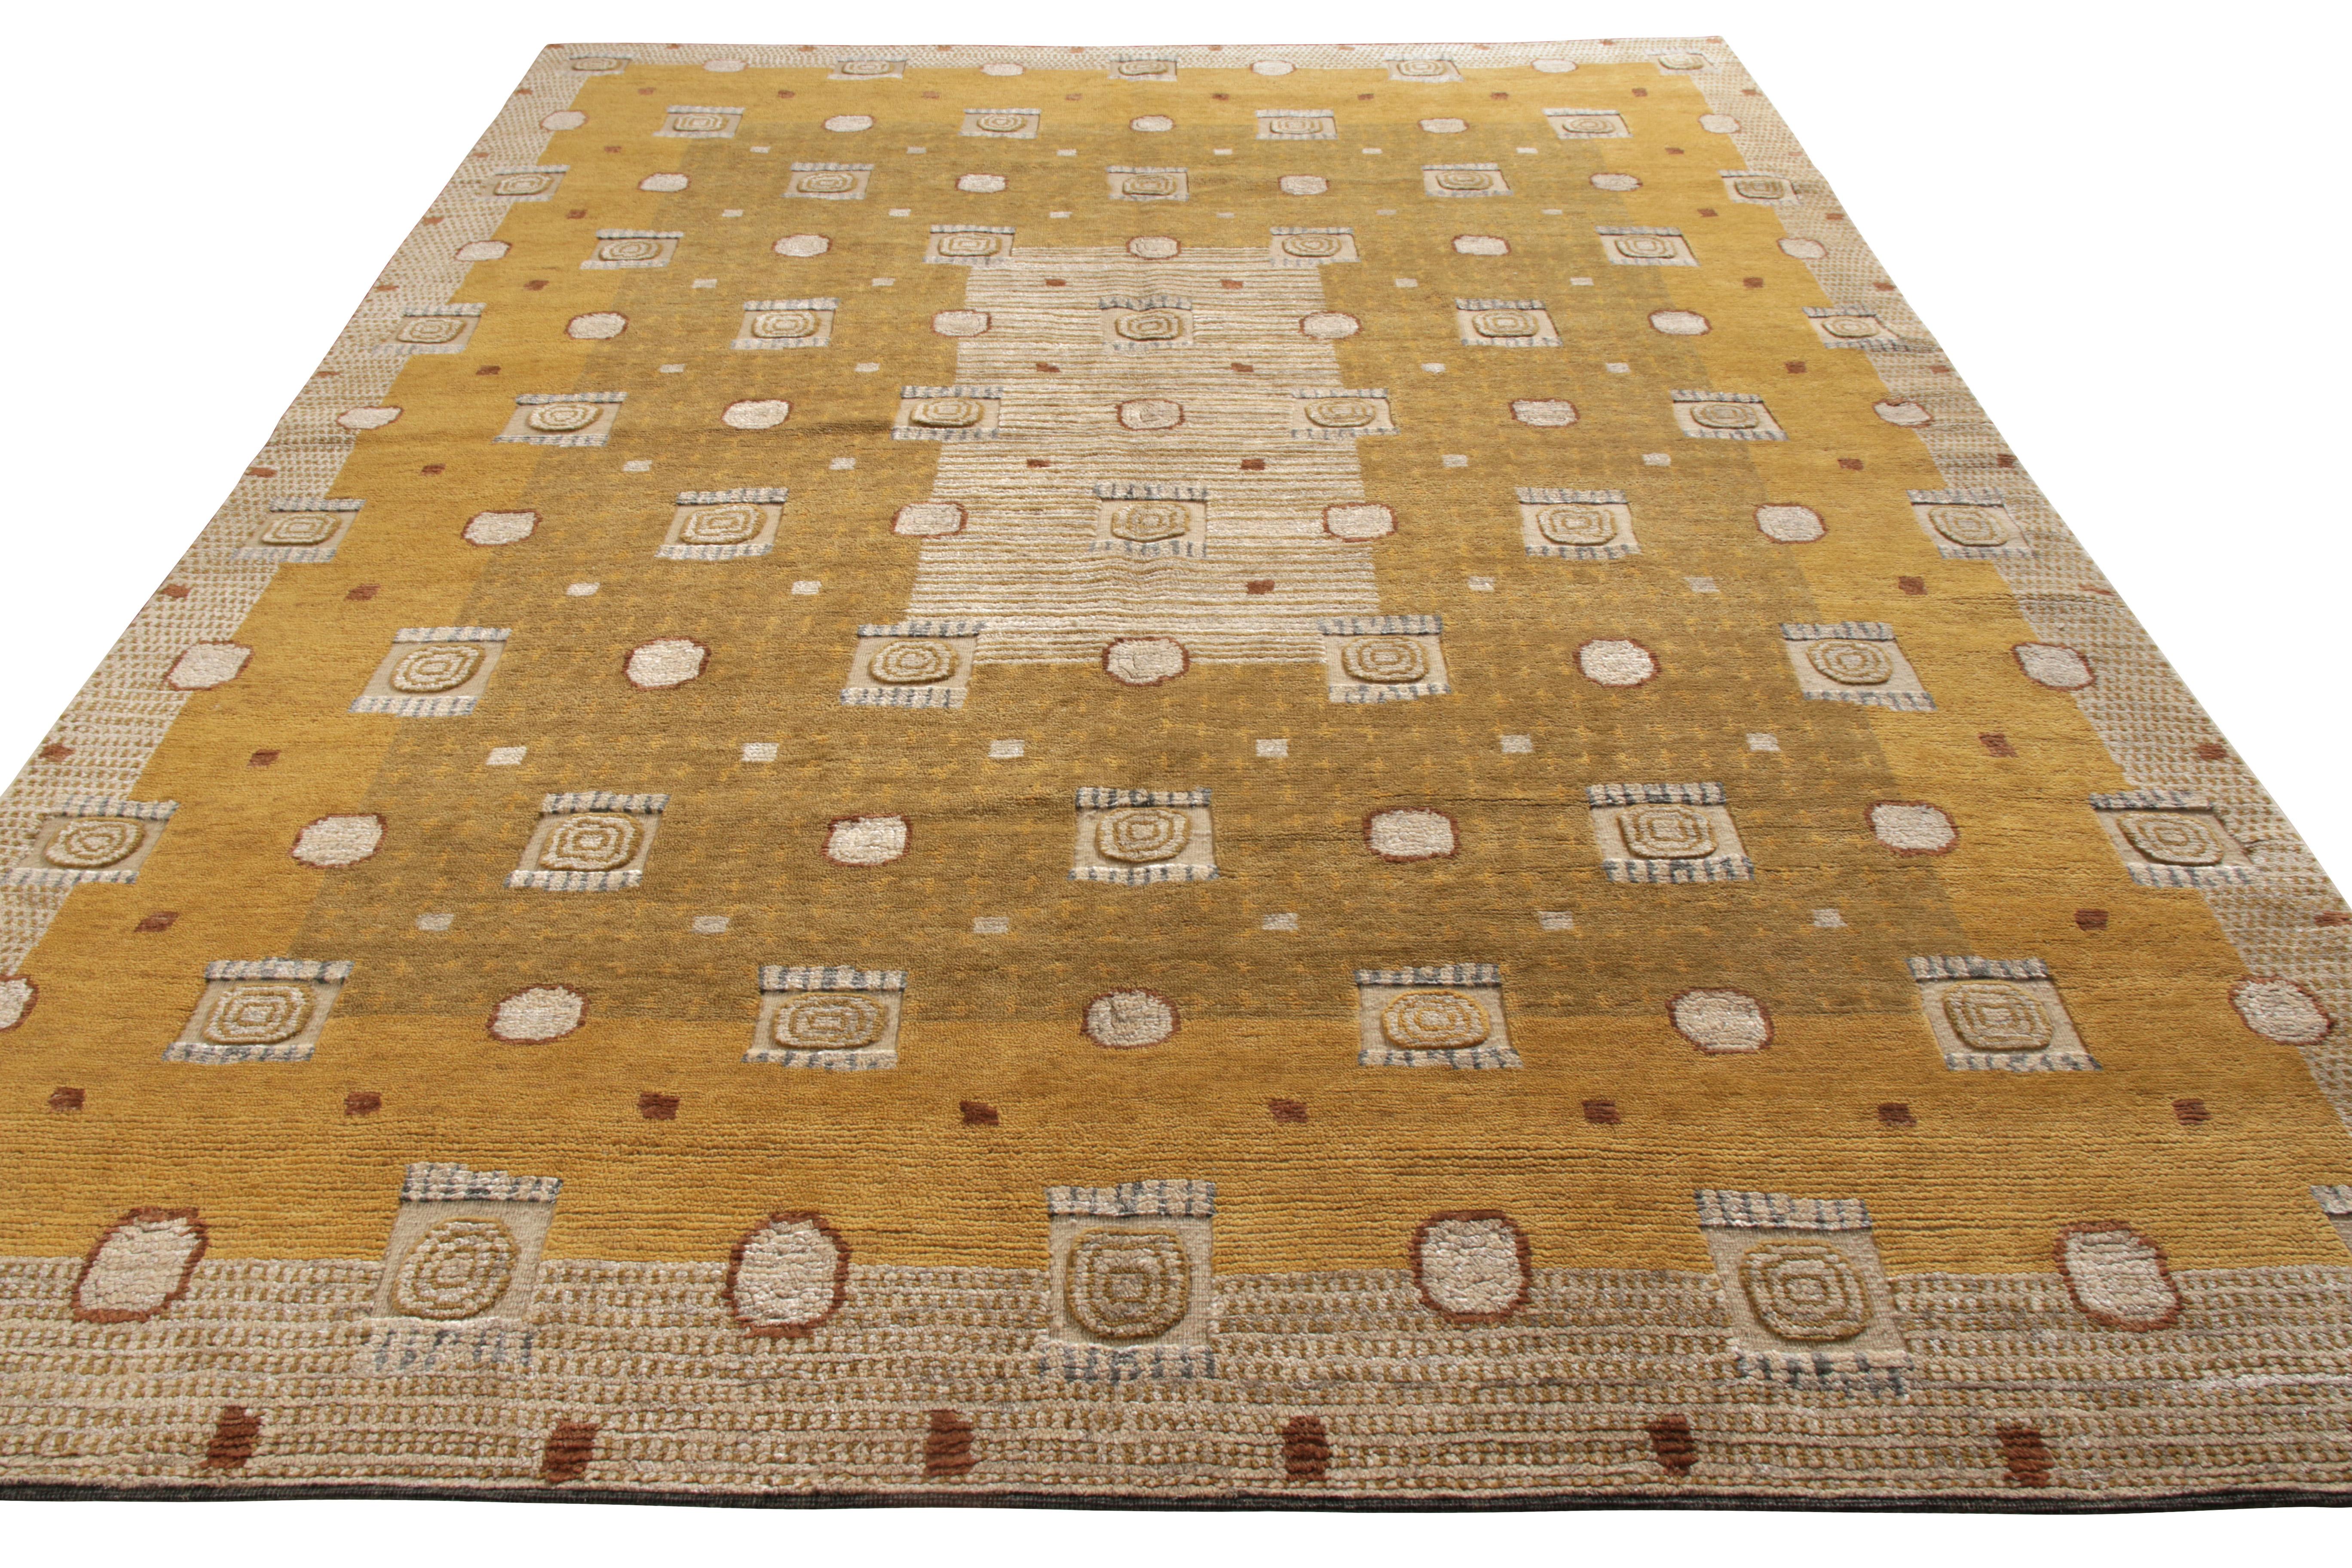 A 9x12 ode to celebrated Art Deco rug styles, from Rug & Kilim’s Deco Collection. Hand knotted in wool, marrying dynamic high-low pile textures with geometric patterns in gold and beige-brown hues. Crisp white accents bring out the graphic, depthful